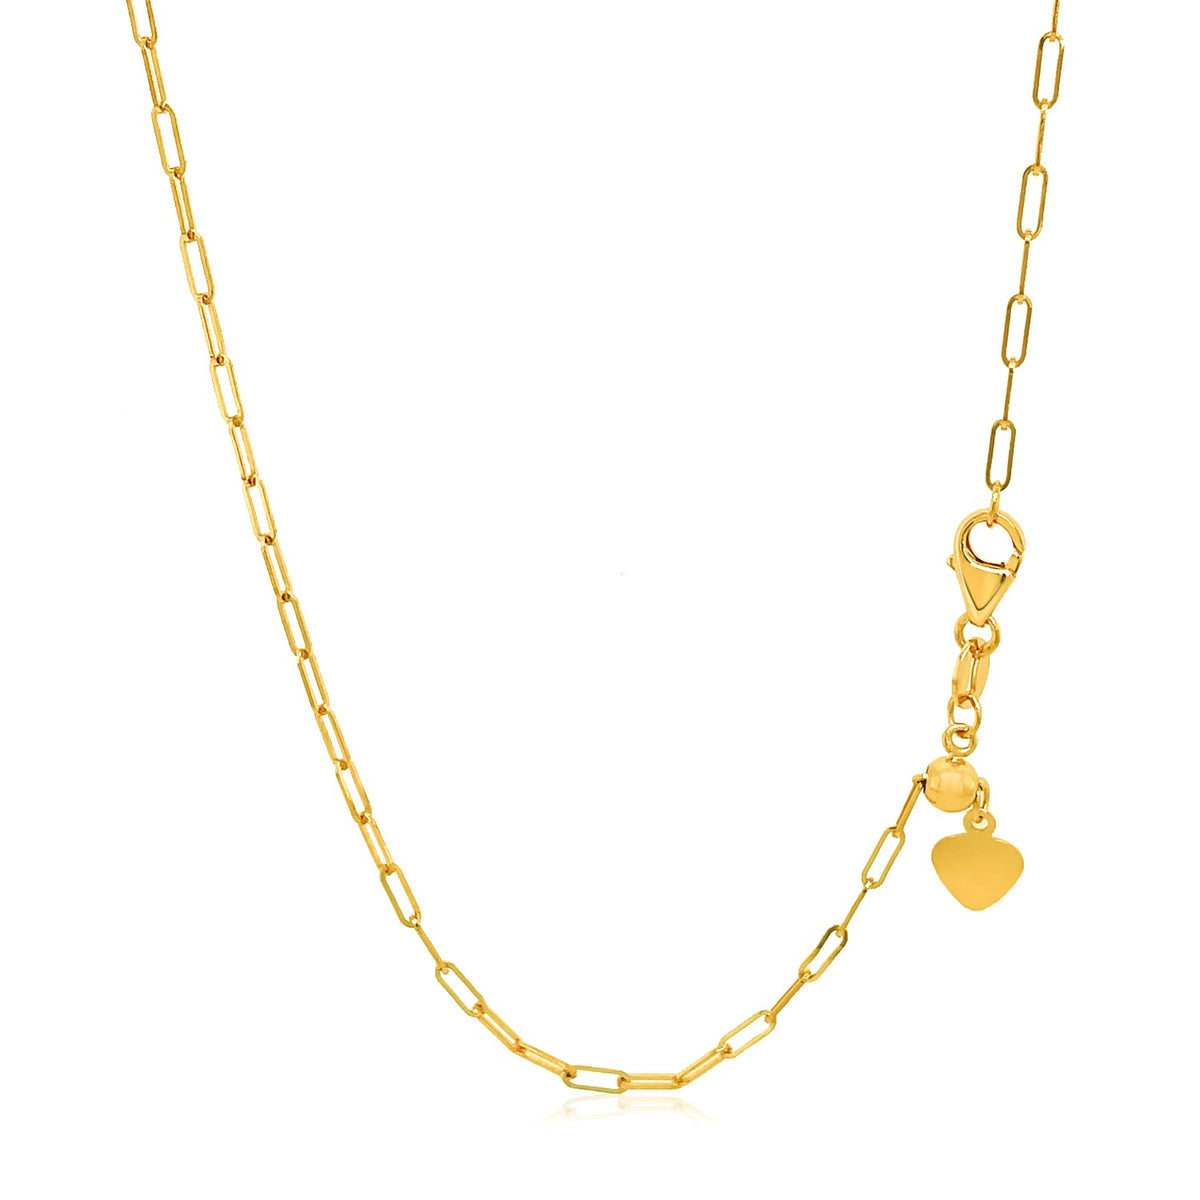 Adjustable Paperclip Chain - 14k Yellow Gold 1.50mm